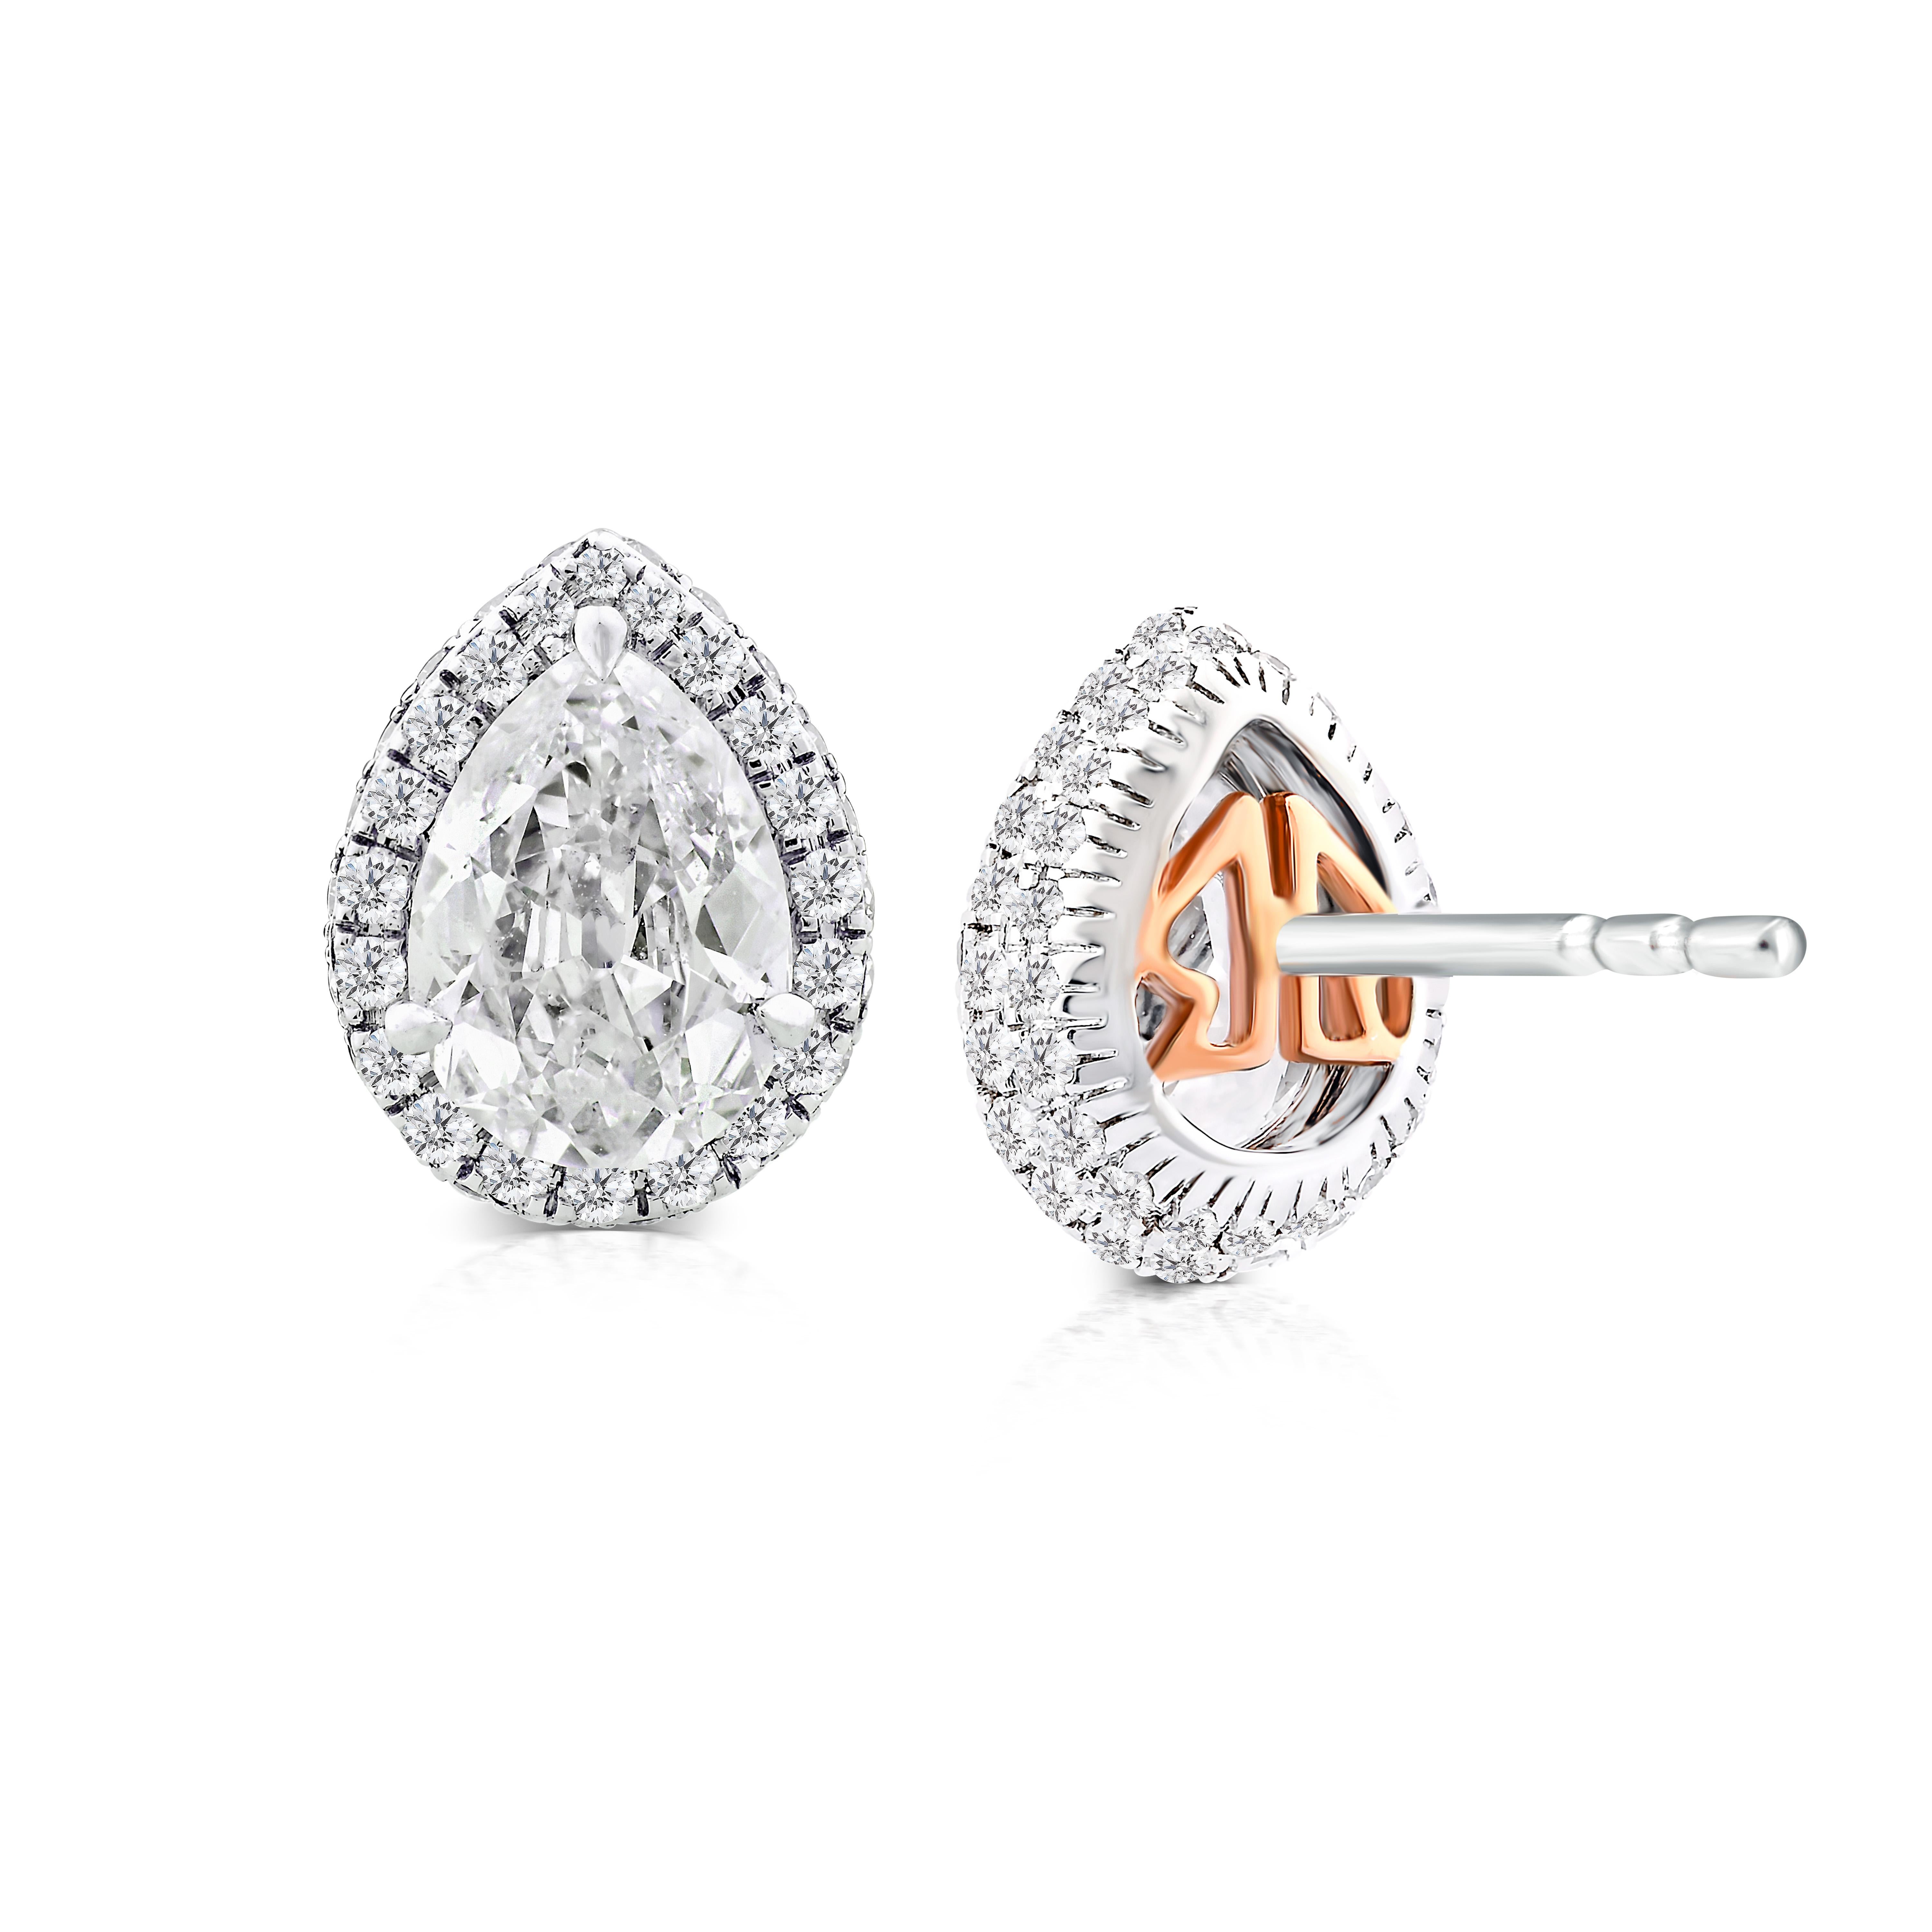 Old Mine Cut 18k Gold 1.57 Ct Old Cut Pear Diamond Halo Earrings Studs Contemporary Earrings For Sale